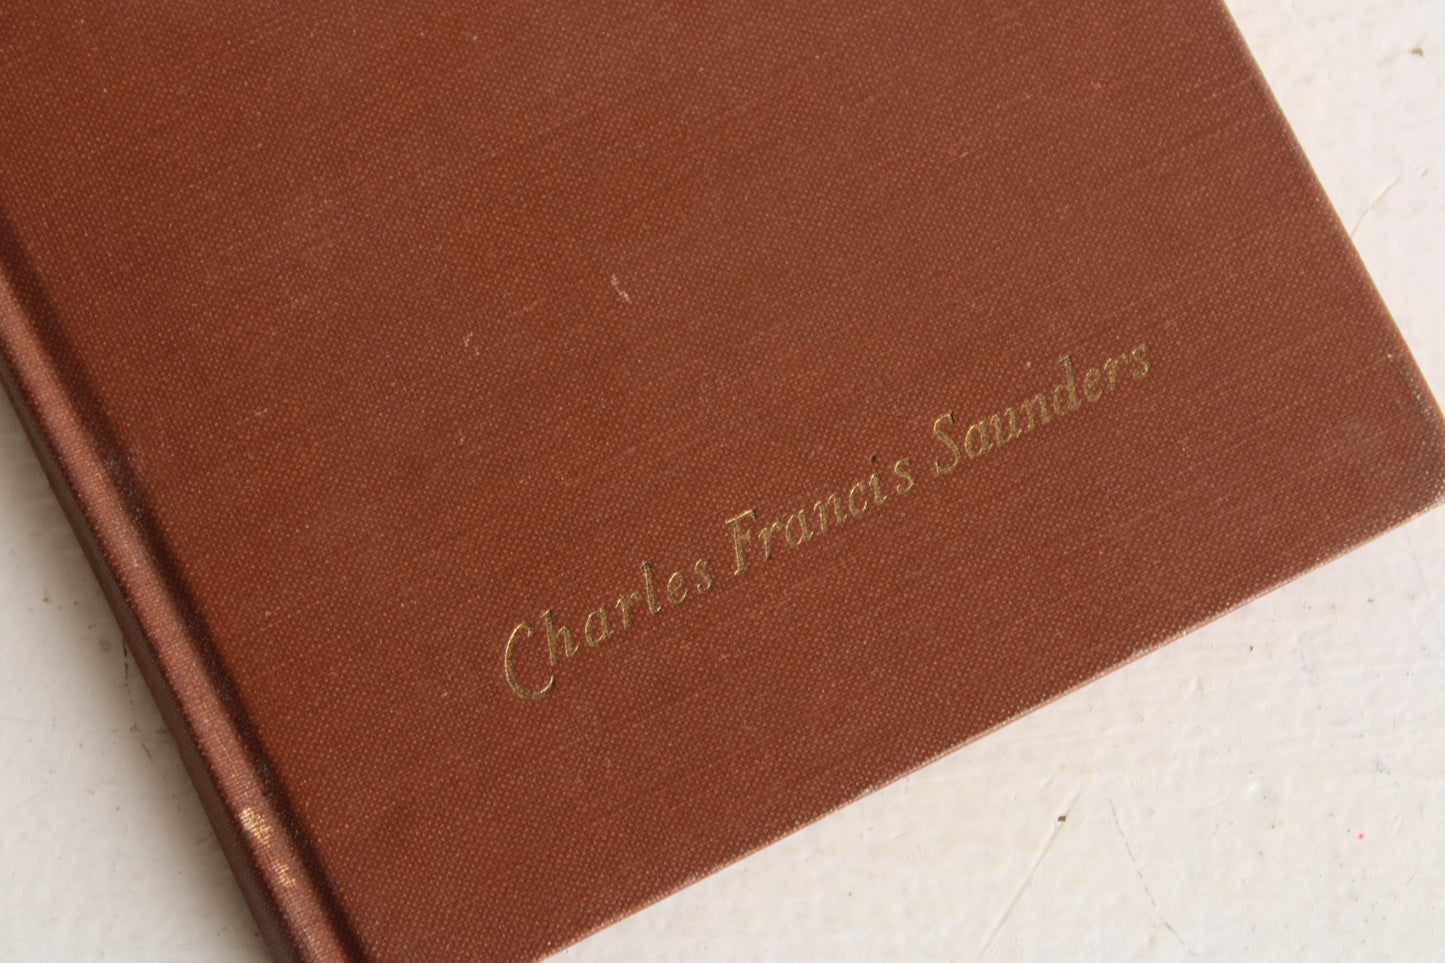 Vintage 1920s Book, "A Little Book of California Missions", by Charles Francis Saunders